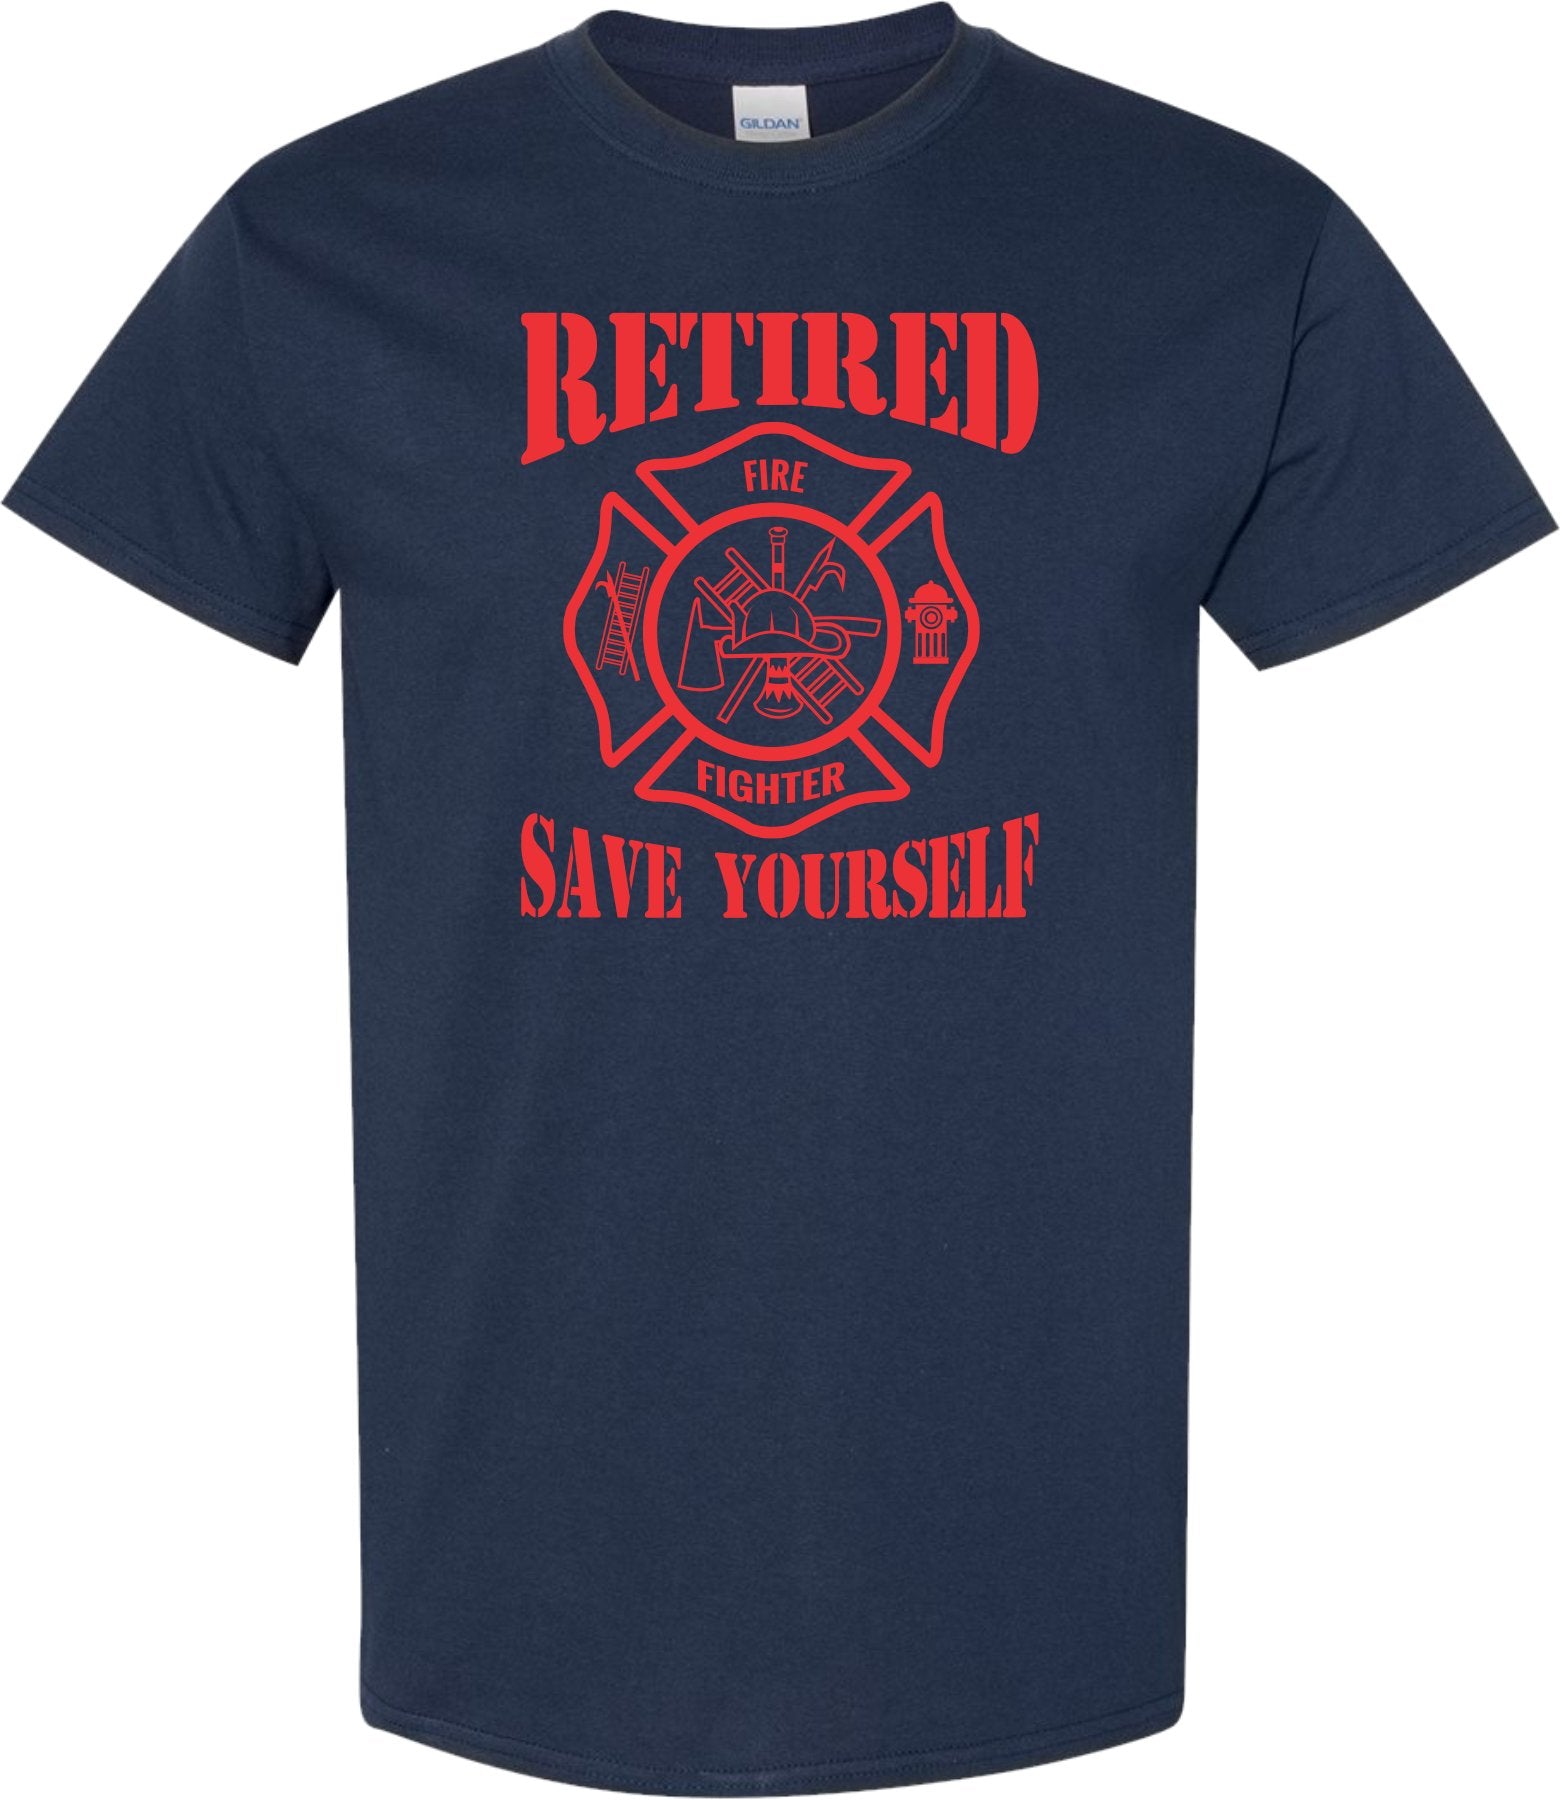 Retired Firefighter, Save Yourself T Shirt - SBS T Shop